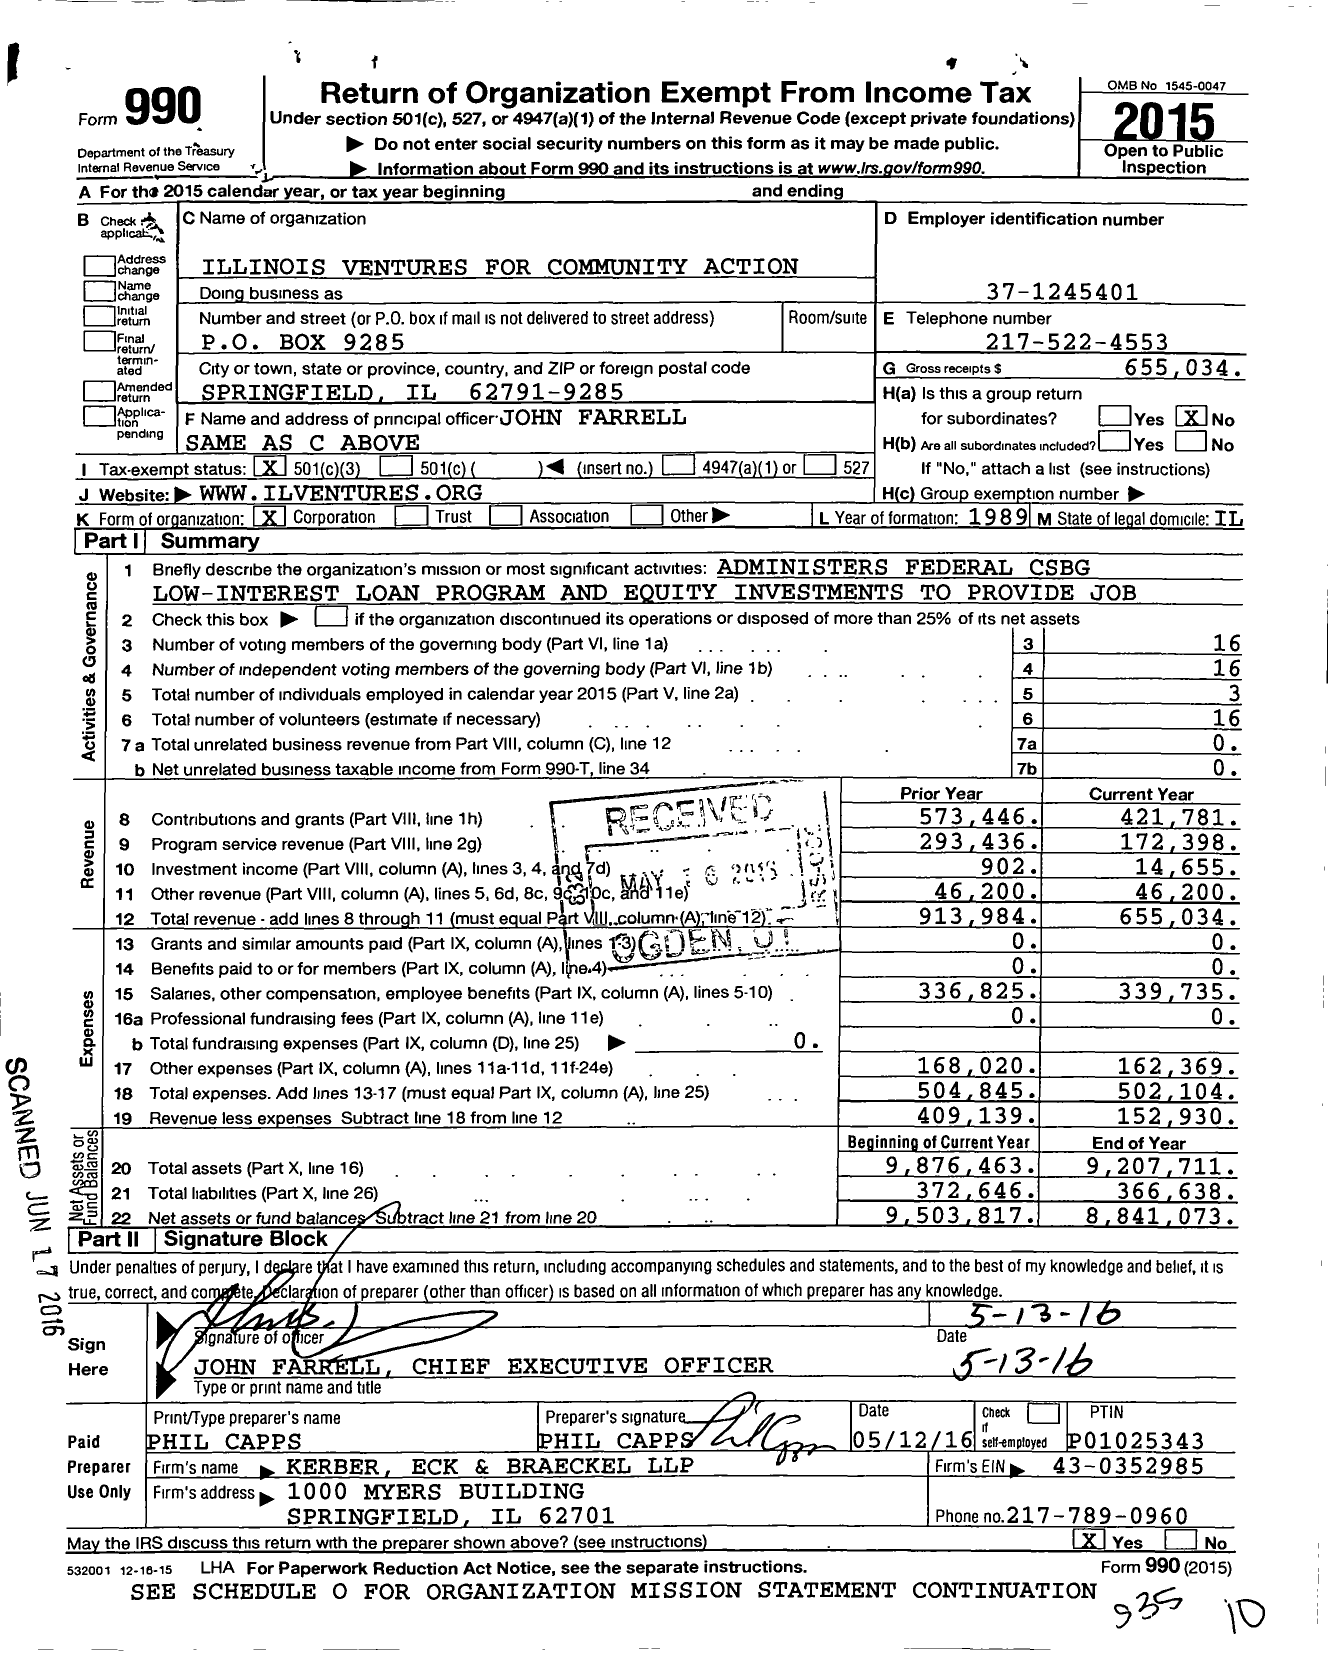 Image of first page of 2015 Form 990 for Illinois Ventures for Community Action